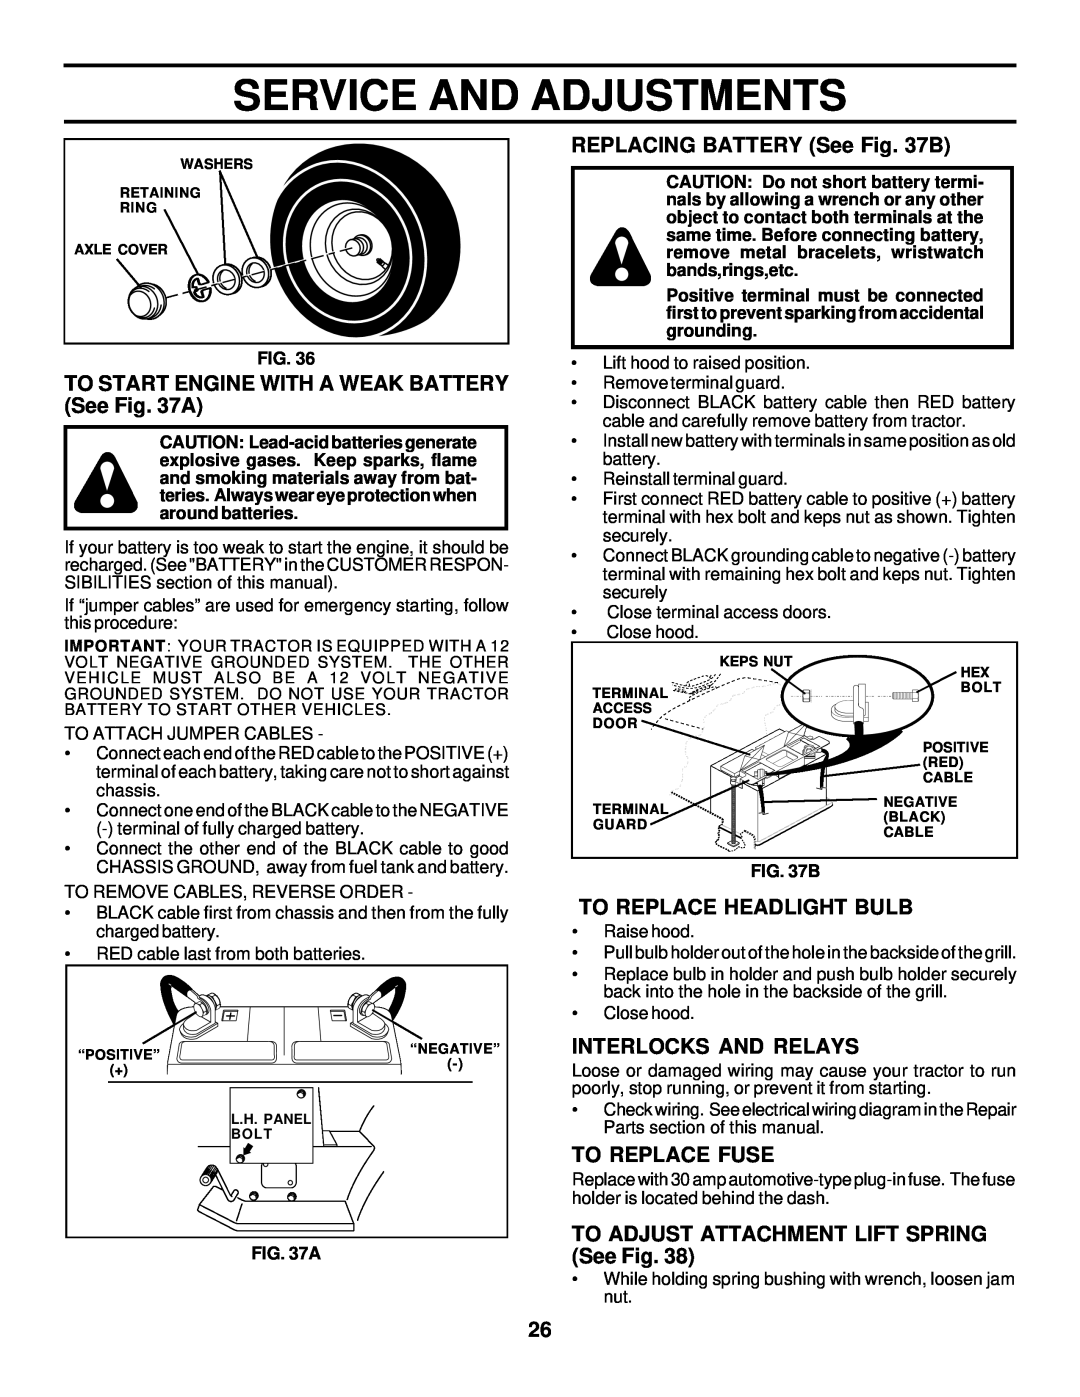 Husqvarna GTH225 owner manual TO START ENGINE WITH A WEAK BATTERY See A, REPLACING BATTERY See B, To Replace Headlight Bulb 